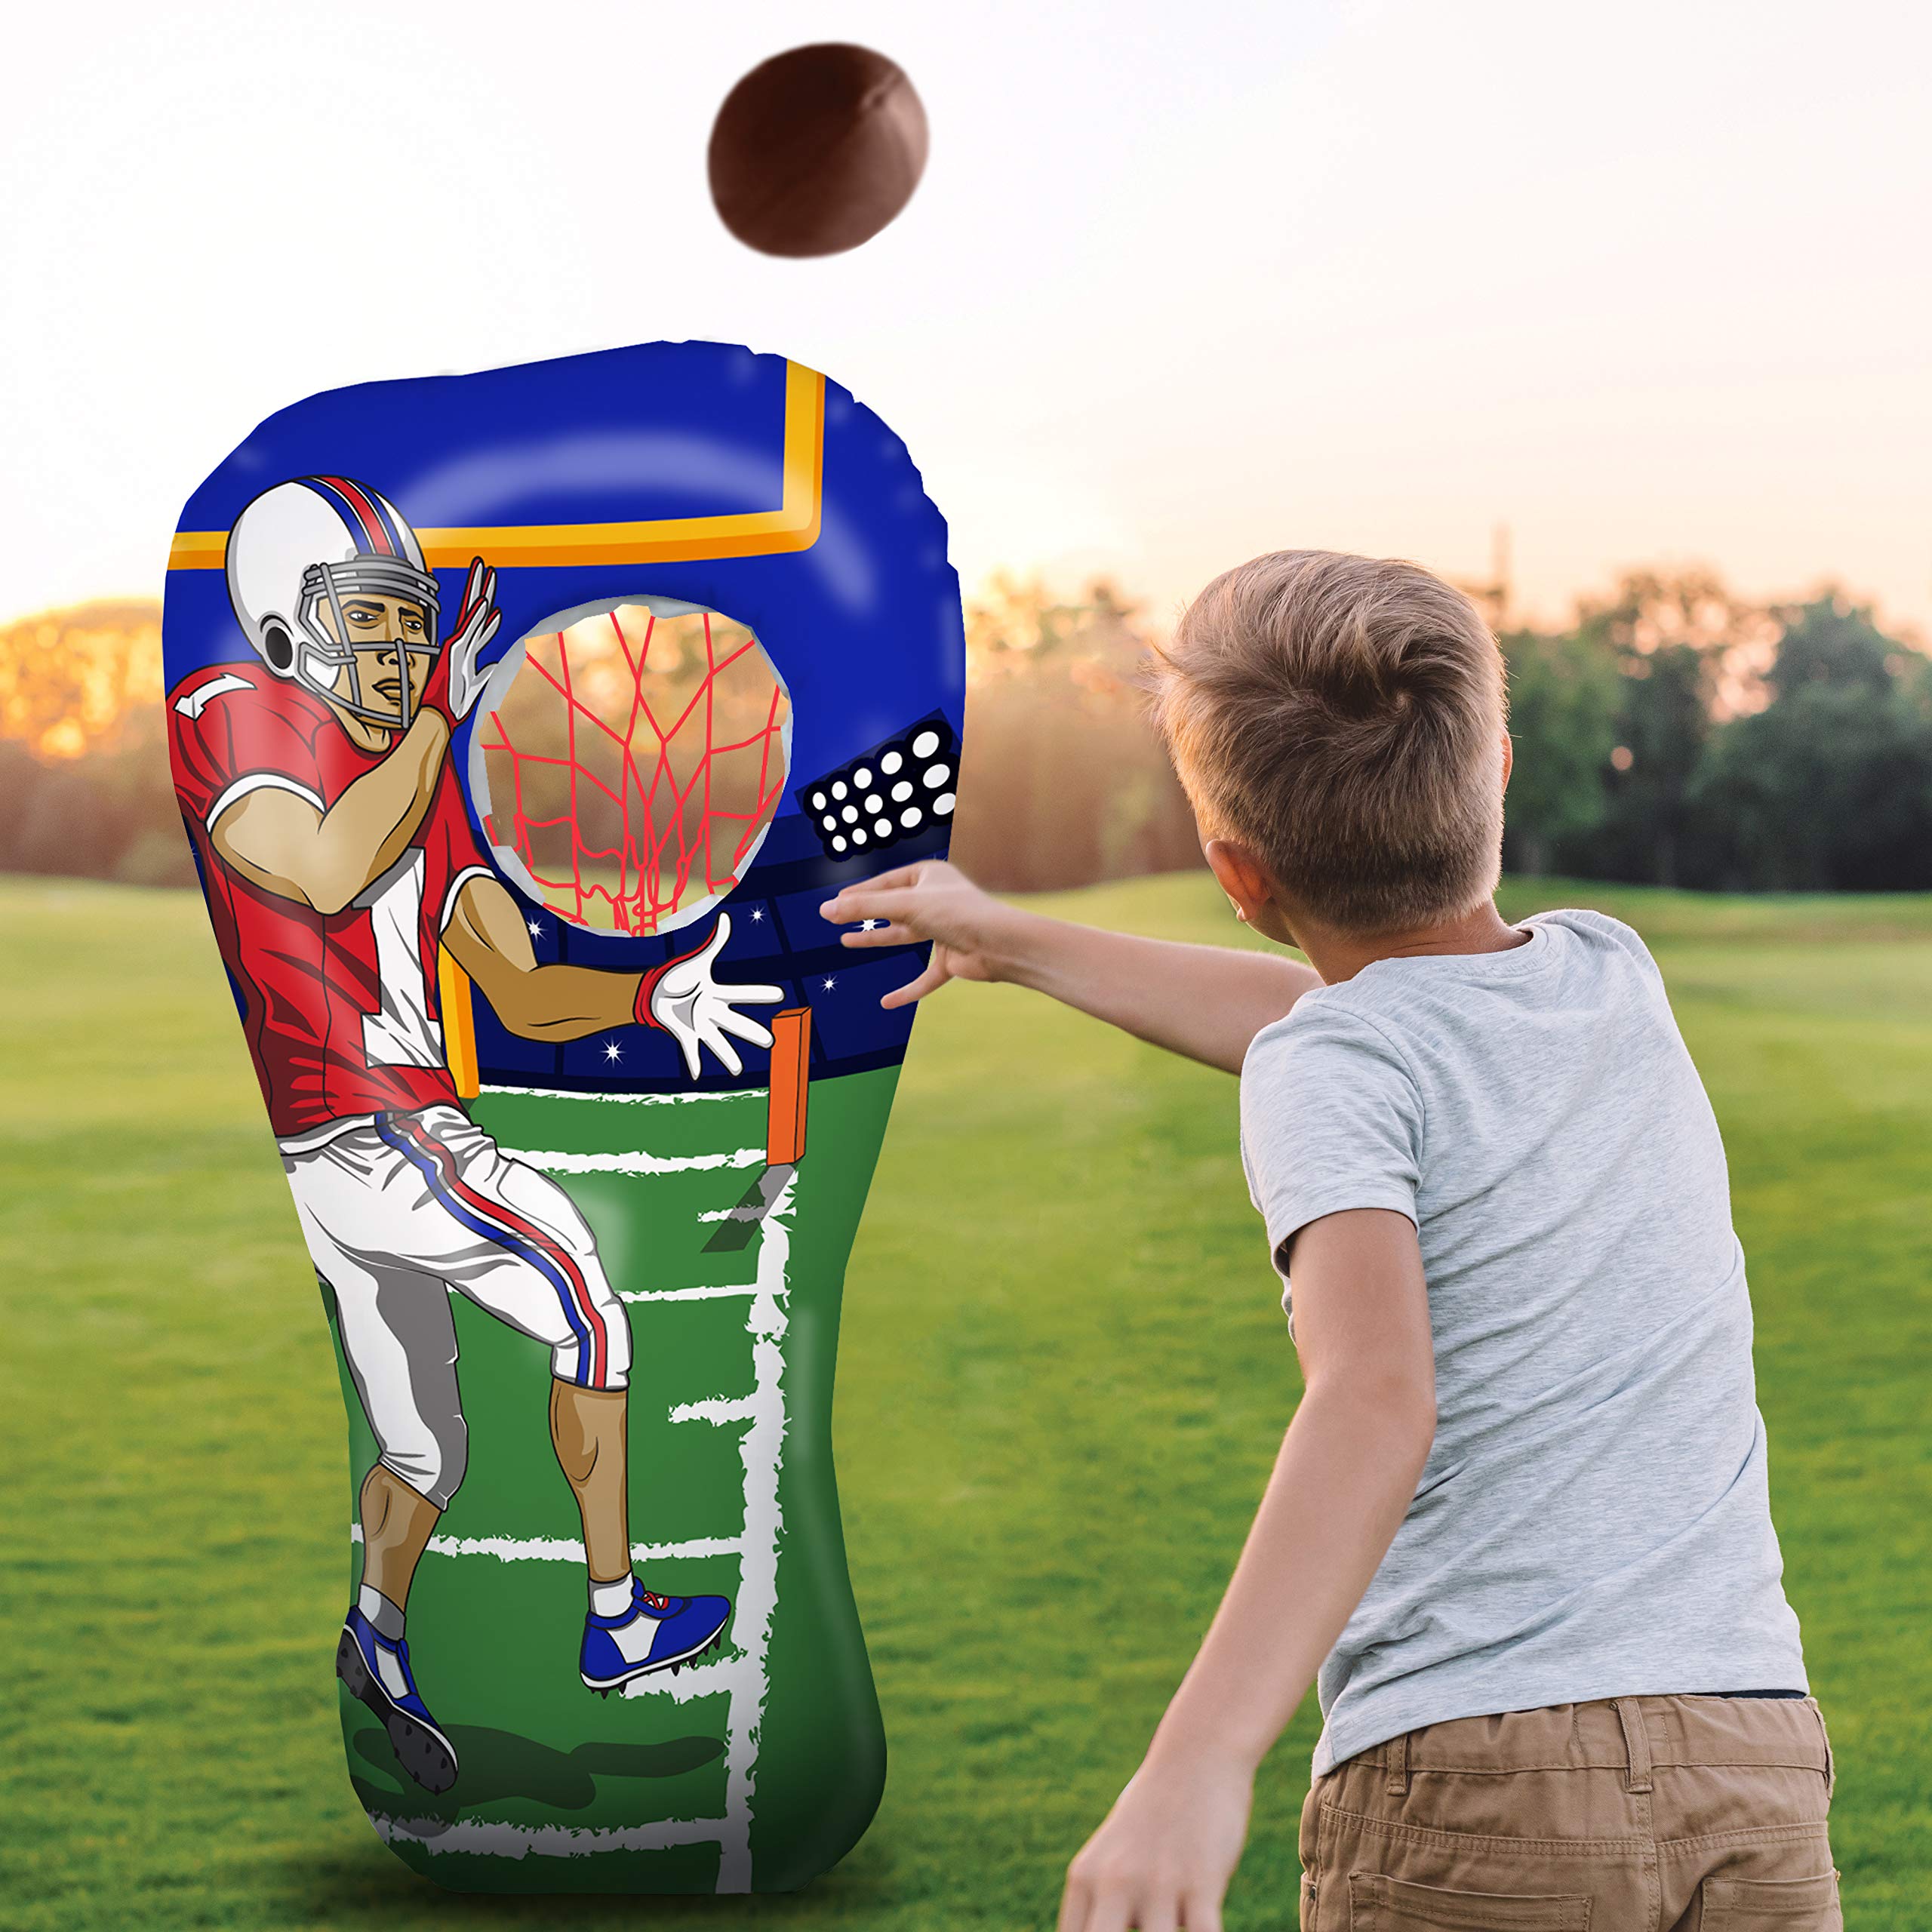 Island Genius Inflatable Football Toss Target Party Game, Sports Toys Gear and Gifts for Kids Boys Girls and Family